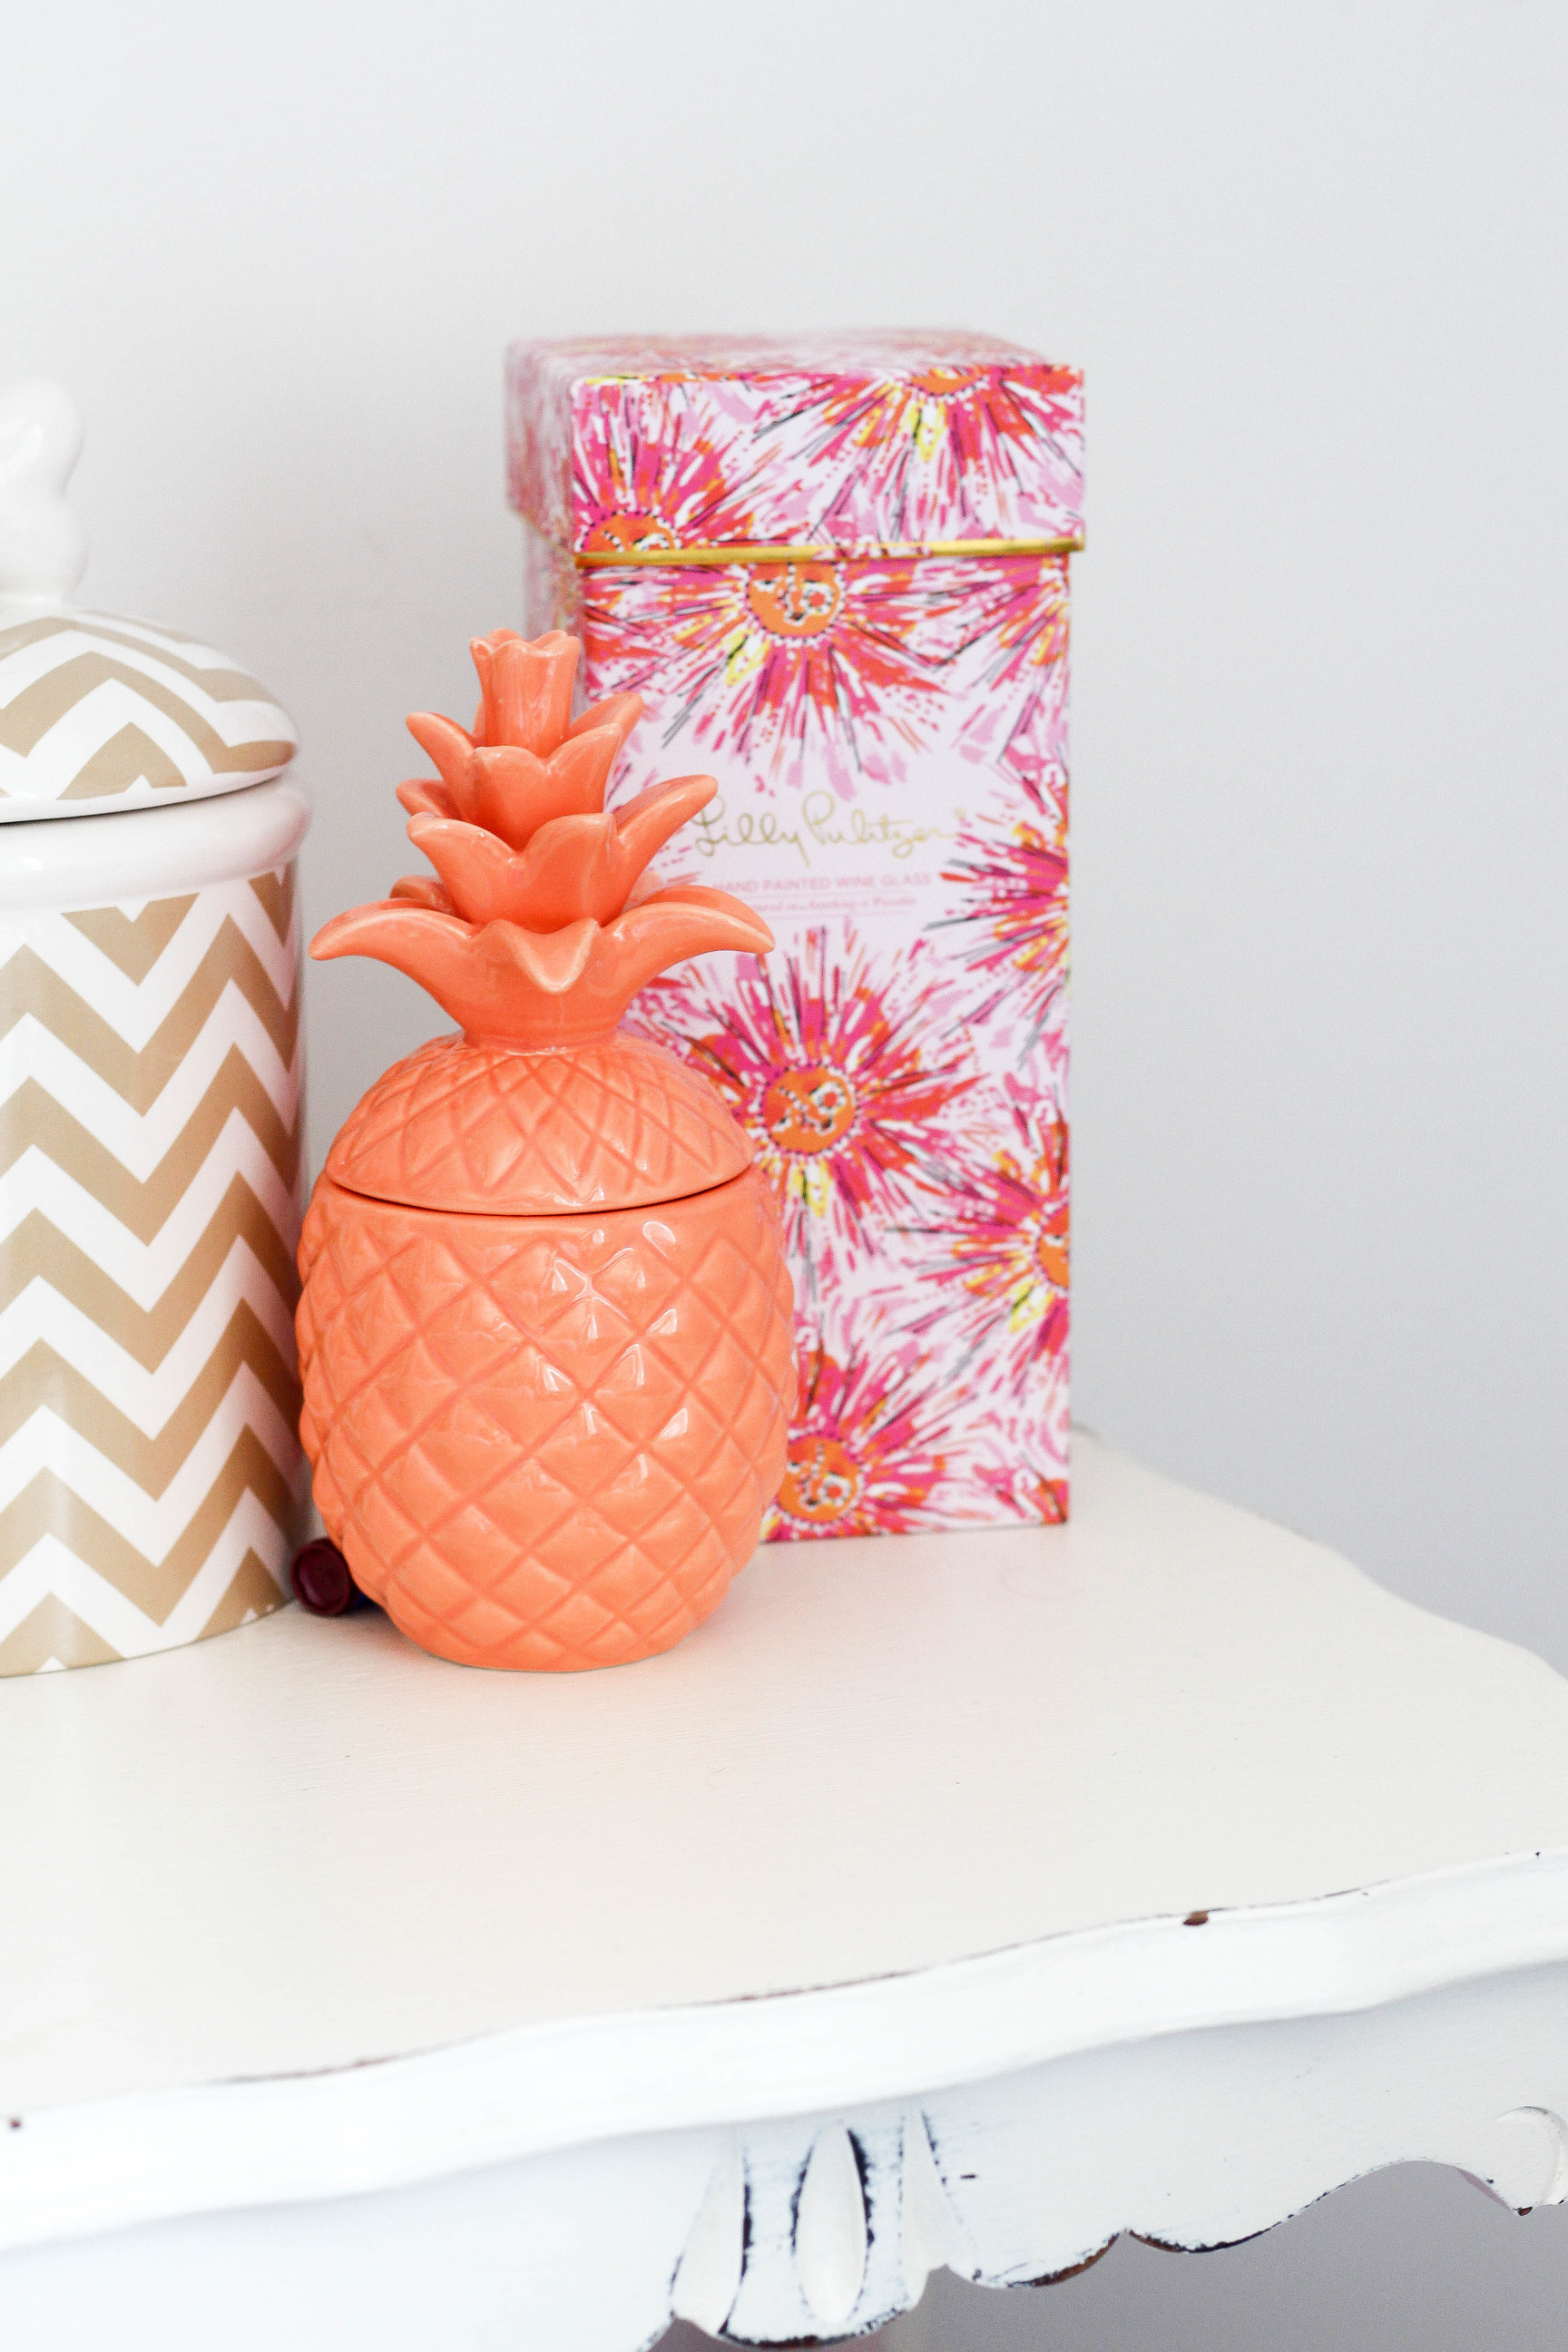 Summer Favorites, fresh flowers, candles, aveda hair care, tassel pillows, pineapples, and more! by lauren lindmark on daily dose of charm